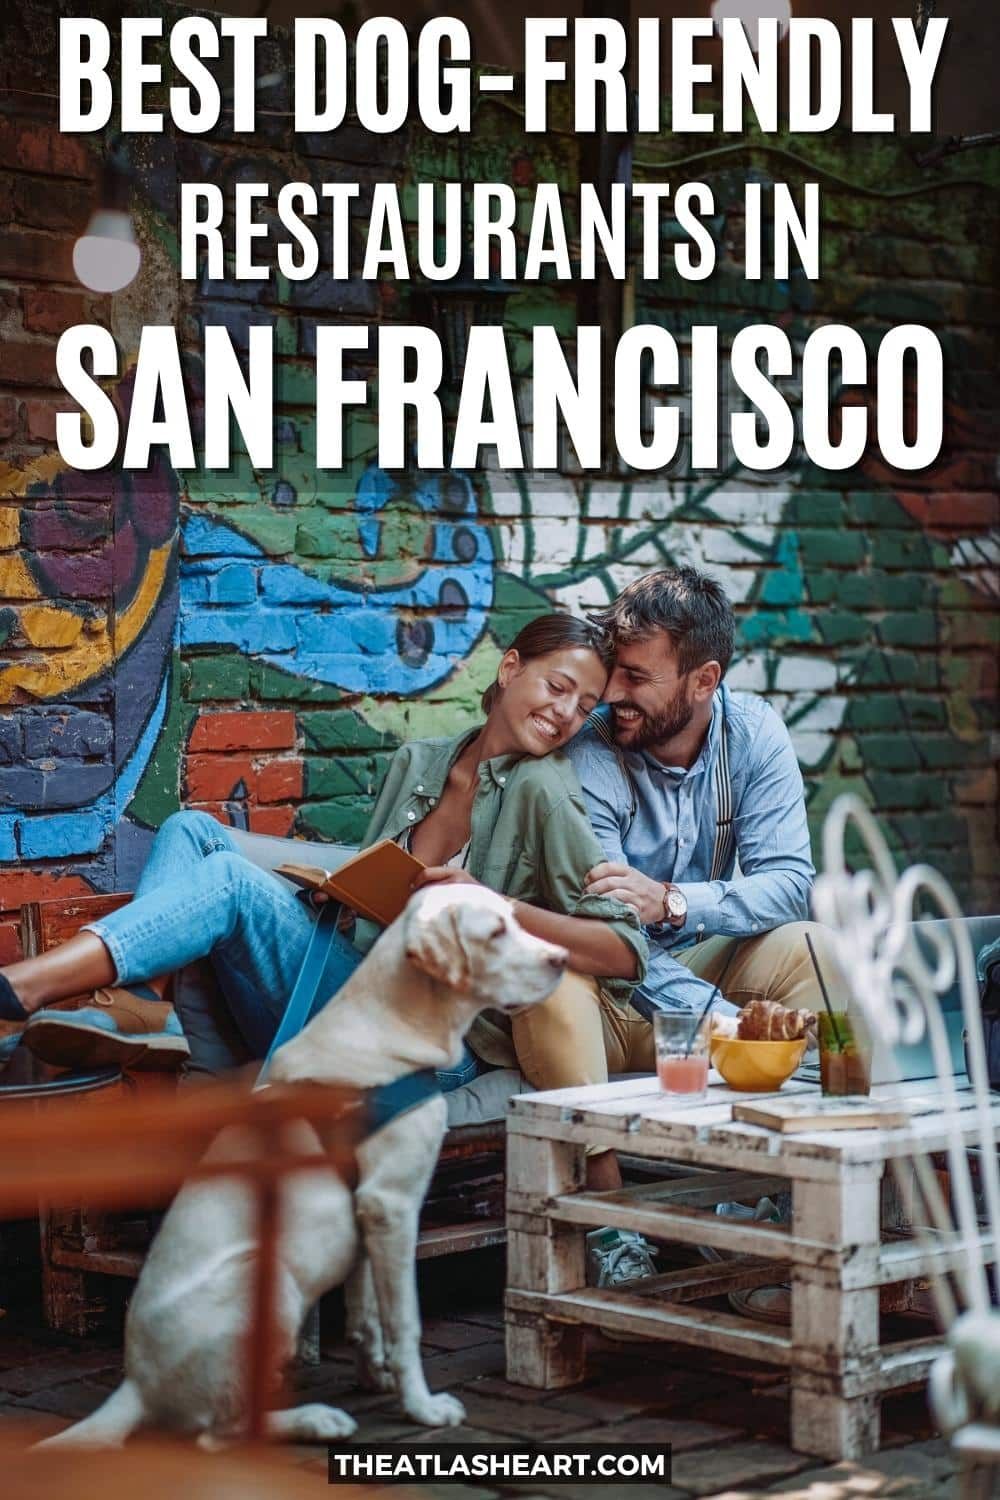 21 Best Dog-Friendly Restaurants in San Francisco [Dine With Your Pooch]